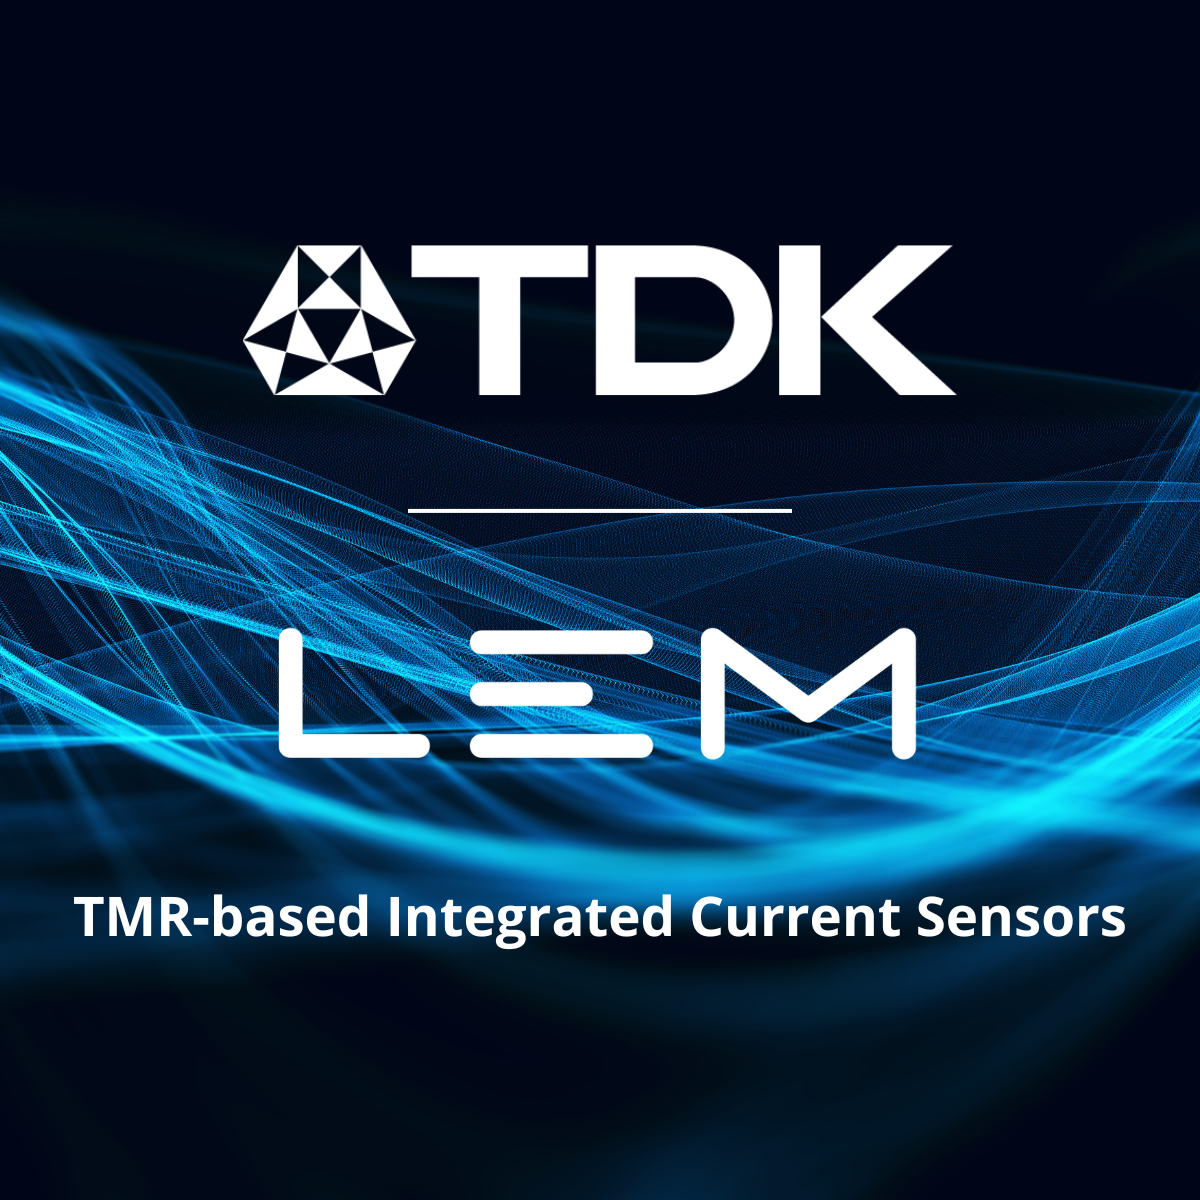  TDK and LEM will cooperate to develop the next generation tunnel magnetoresistive integrated current sensor for electrification applications